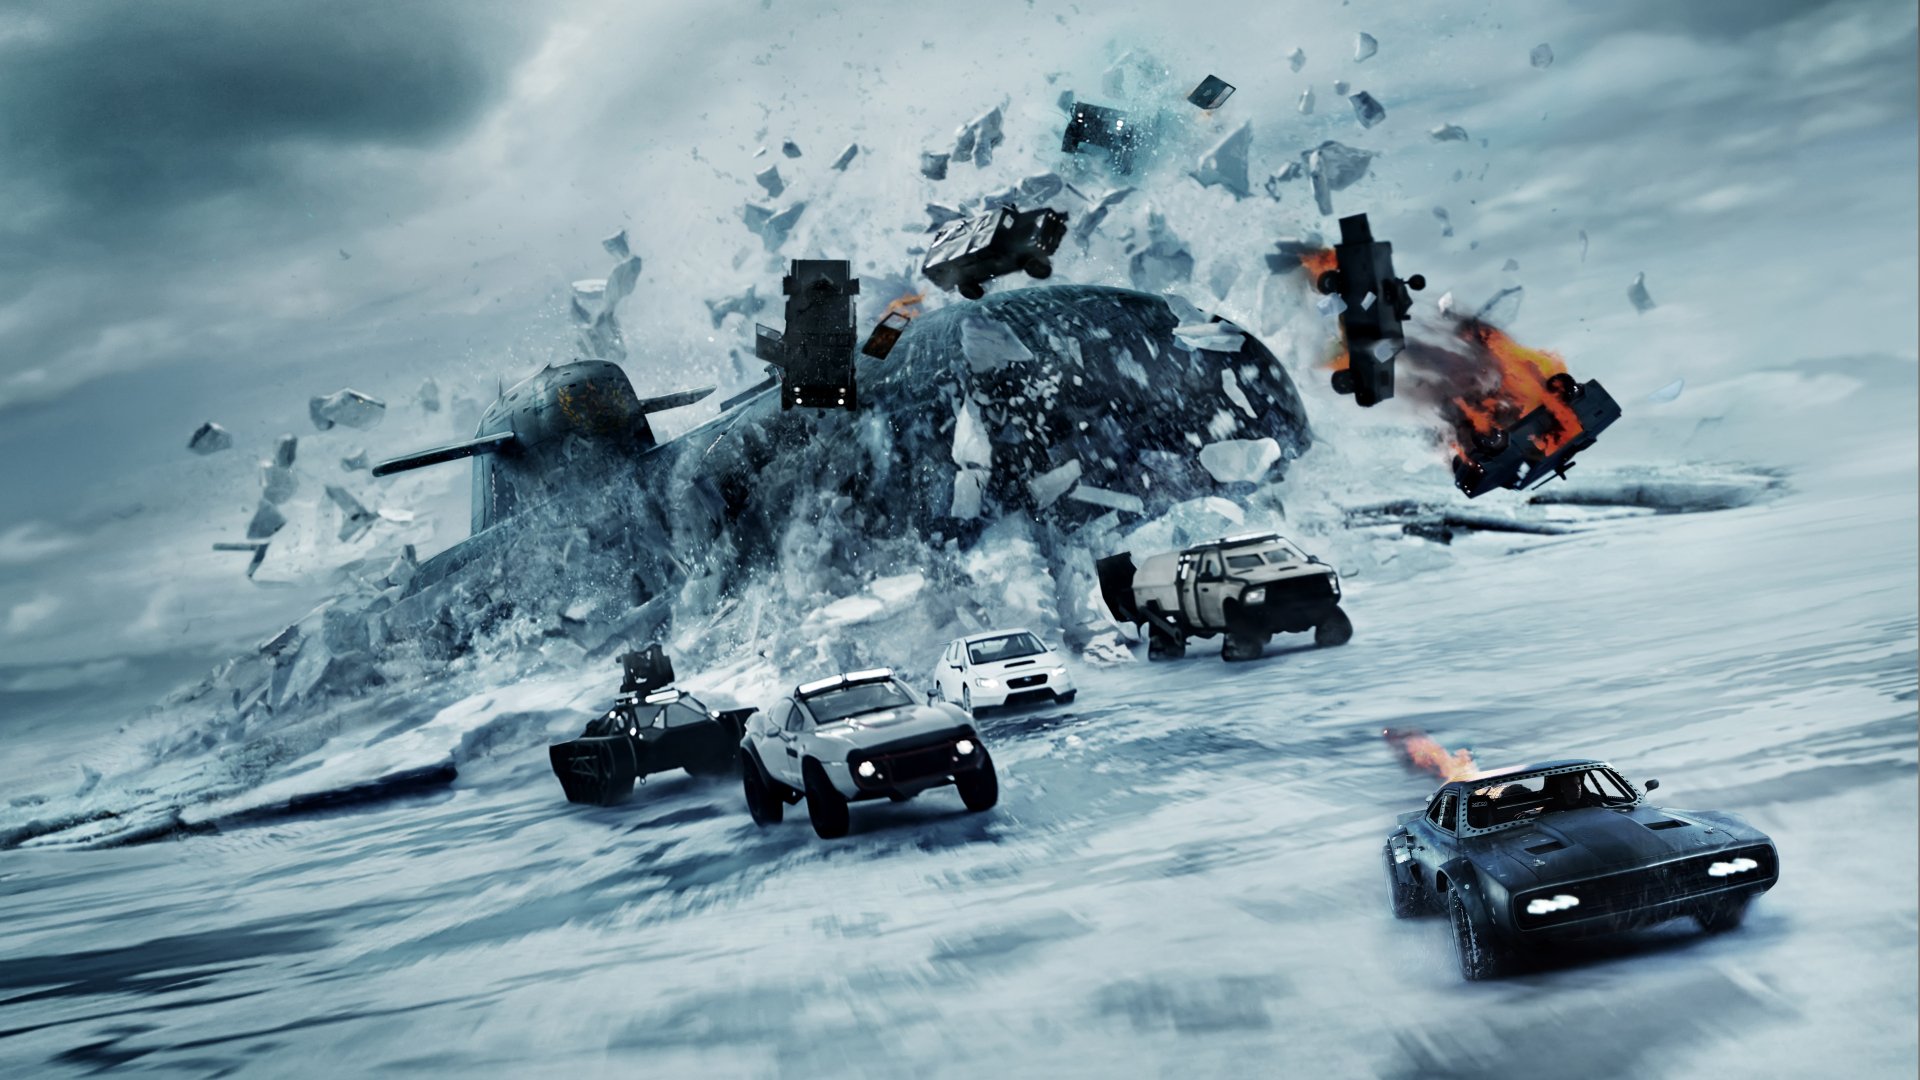 20+ The Fate of The Furious HD Wallpapers | Background Images